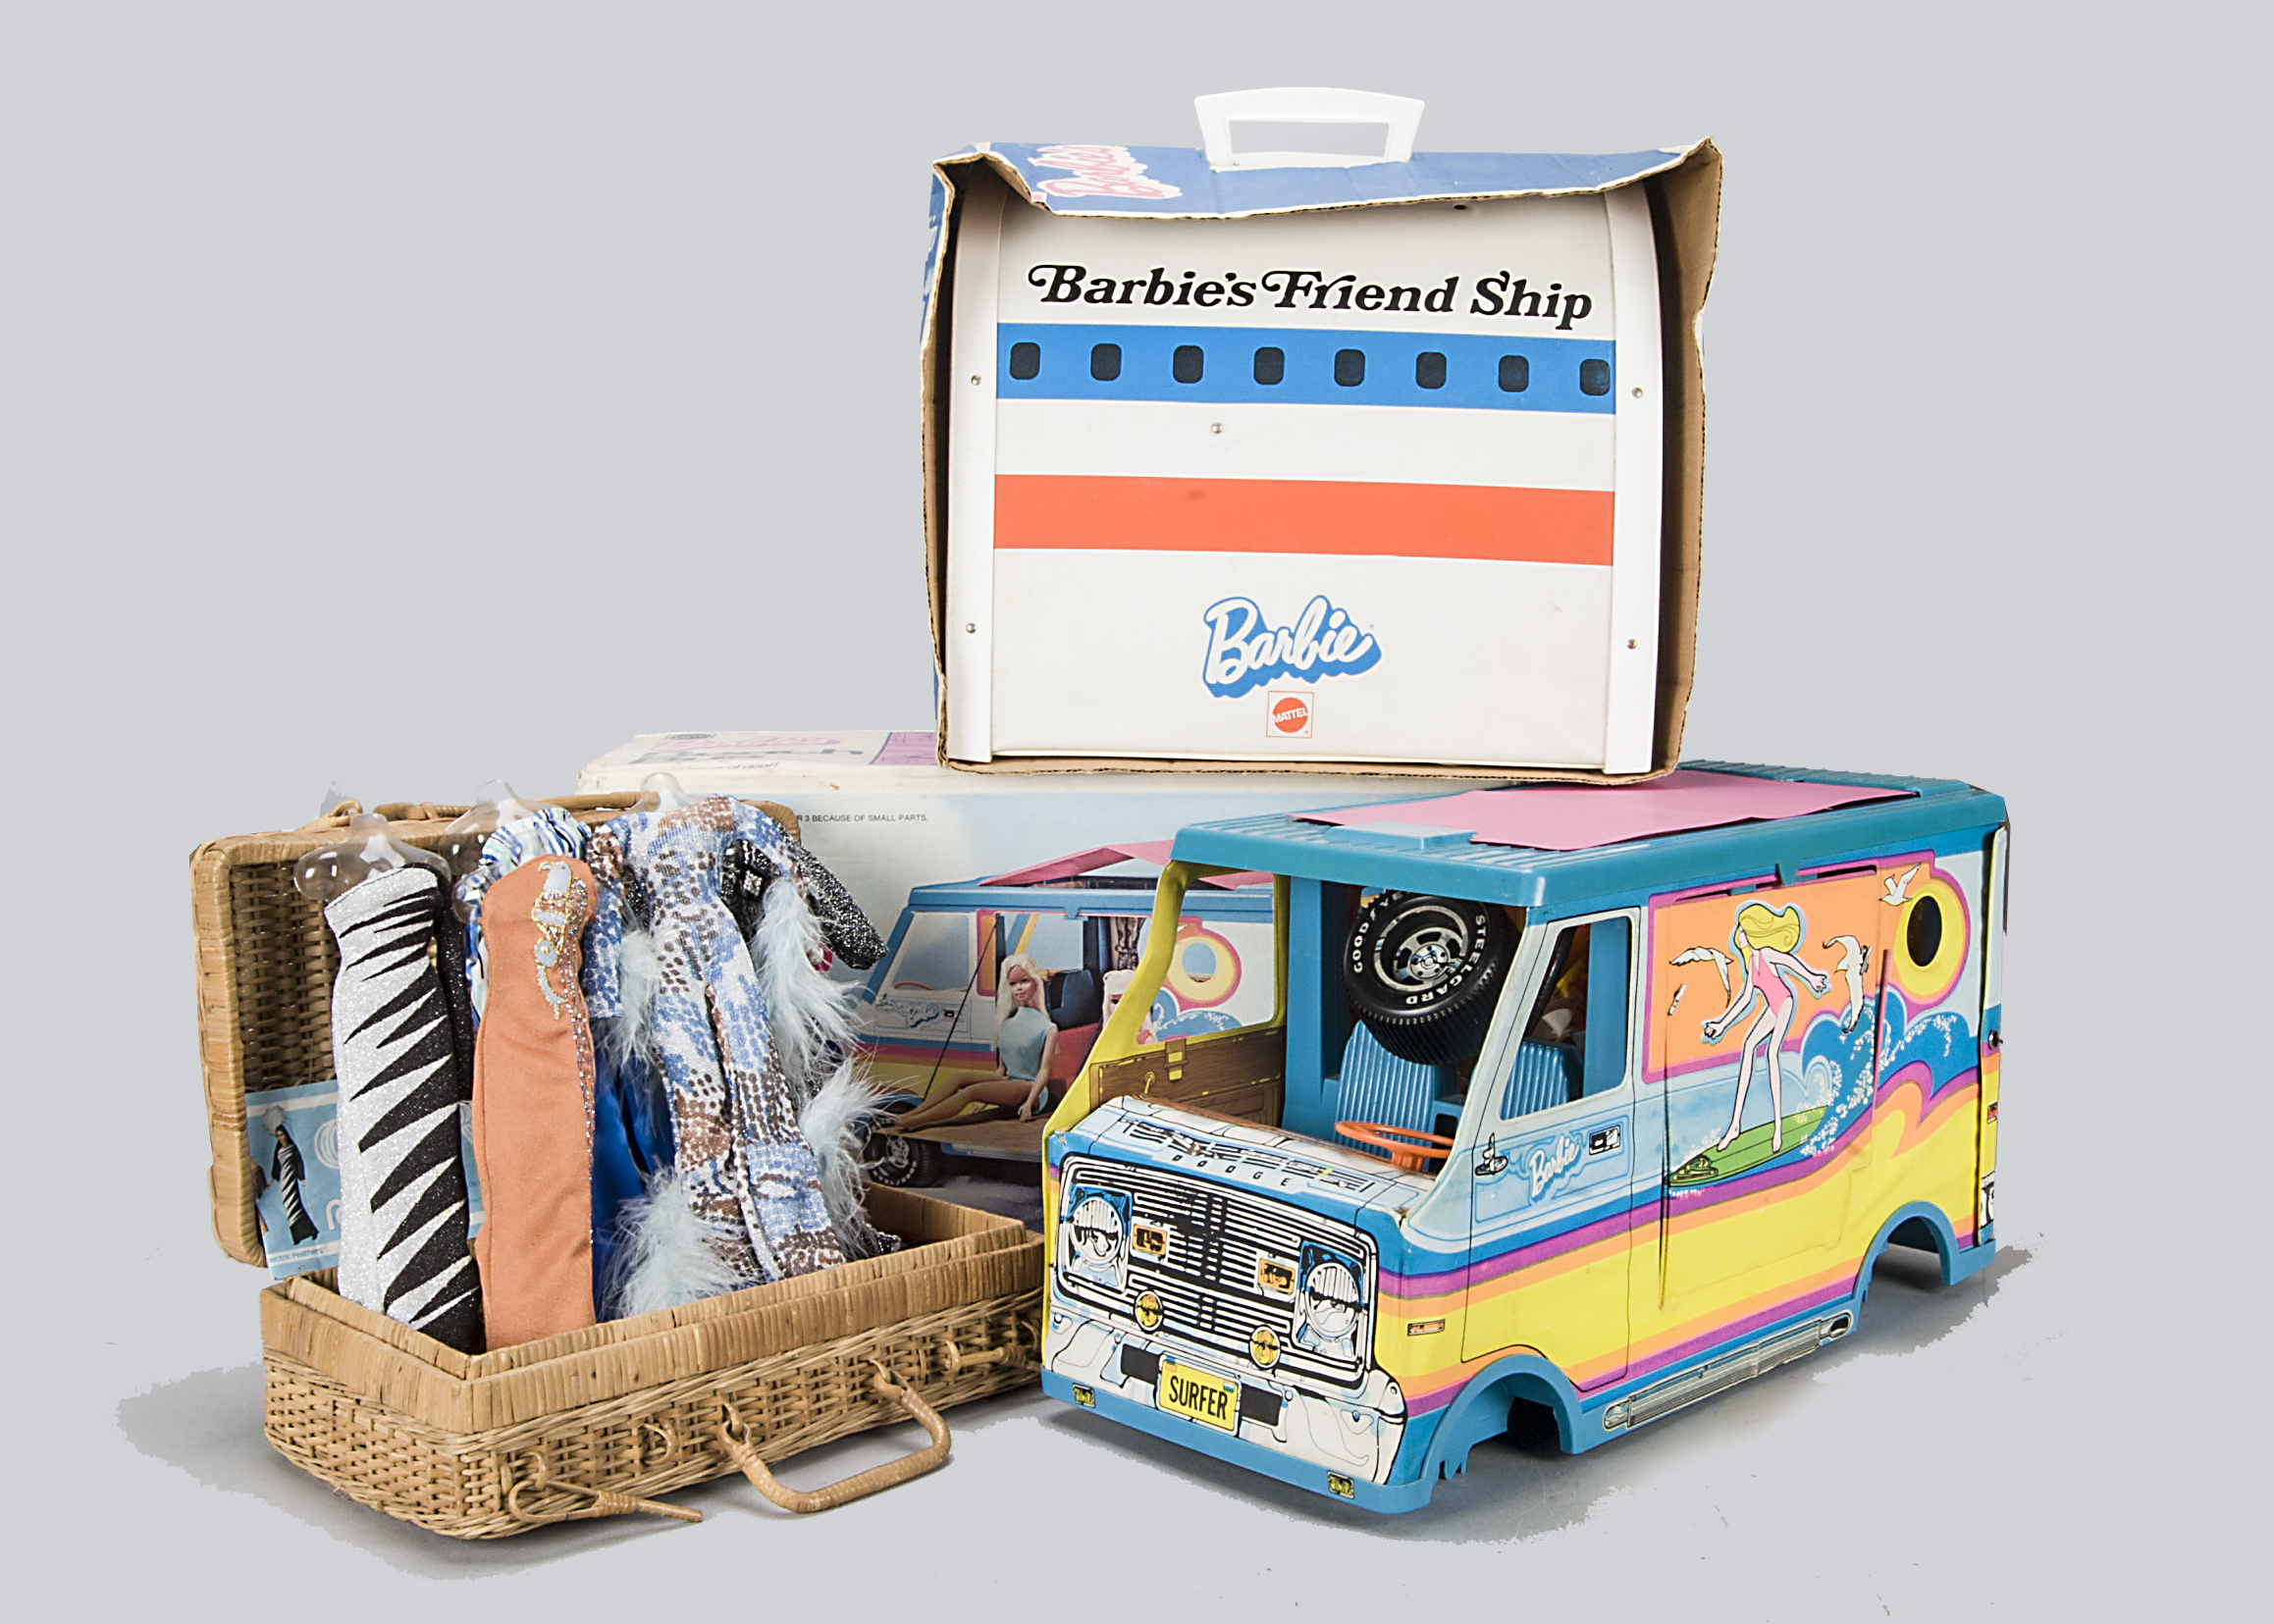 Mattel Barbie Friend Ship, vinyl carry case in the form of a United Airlines jet, with most of